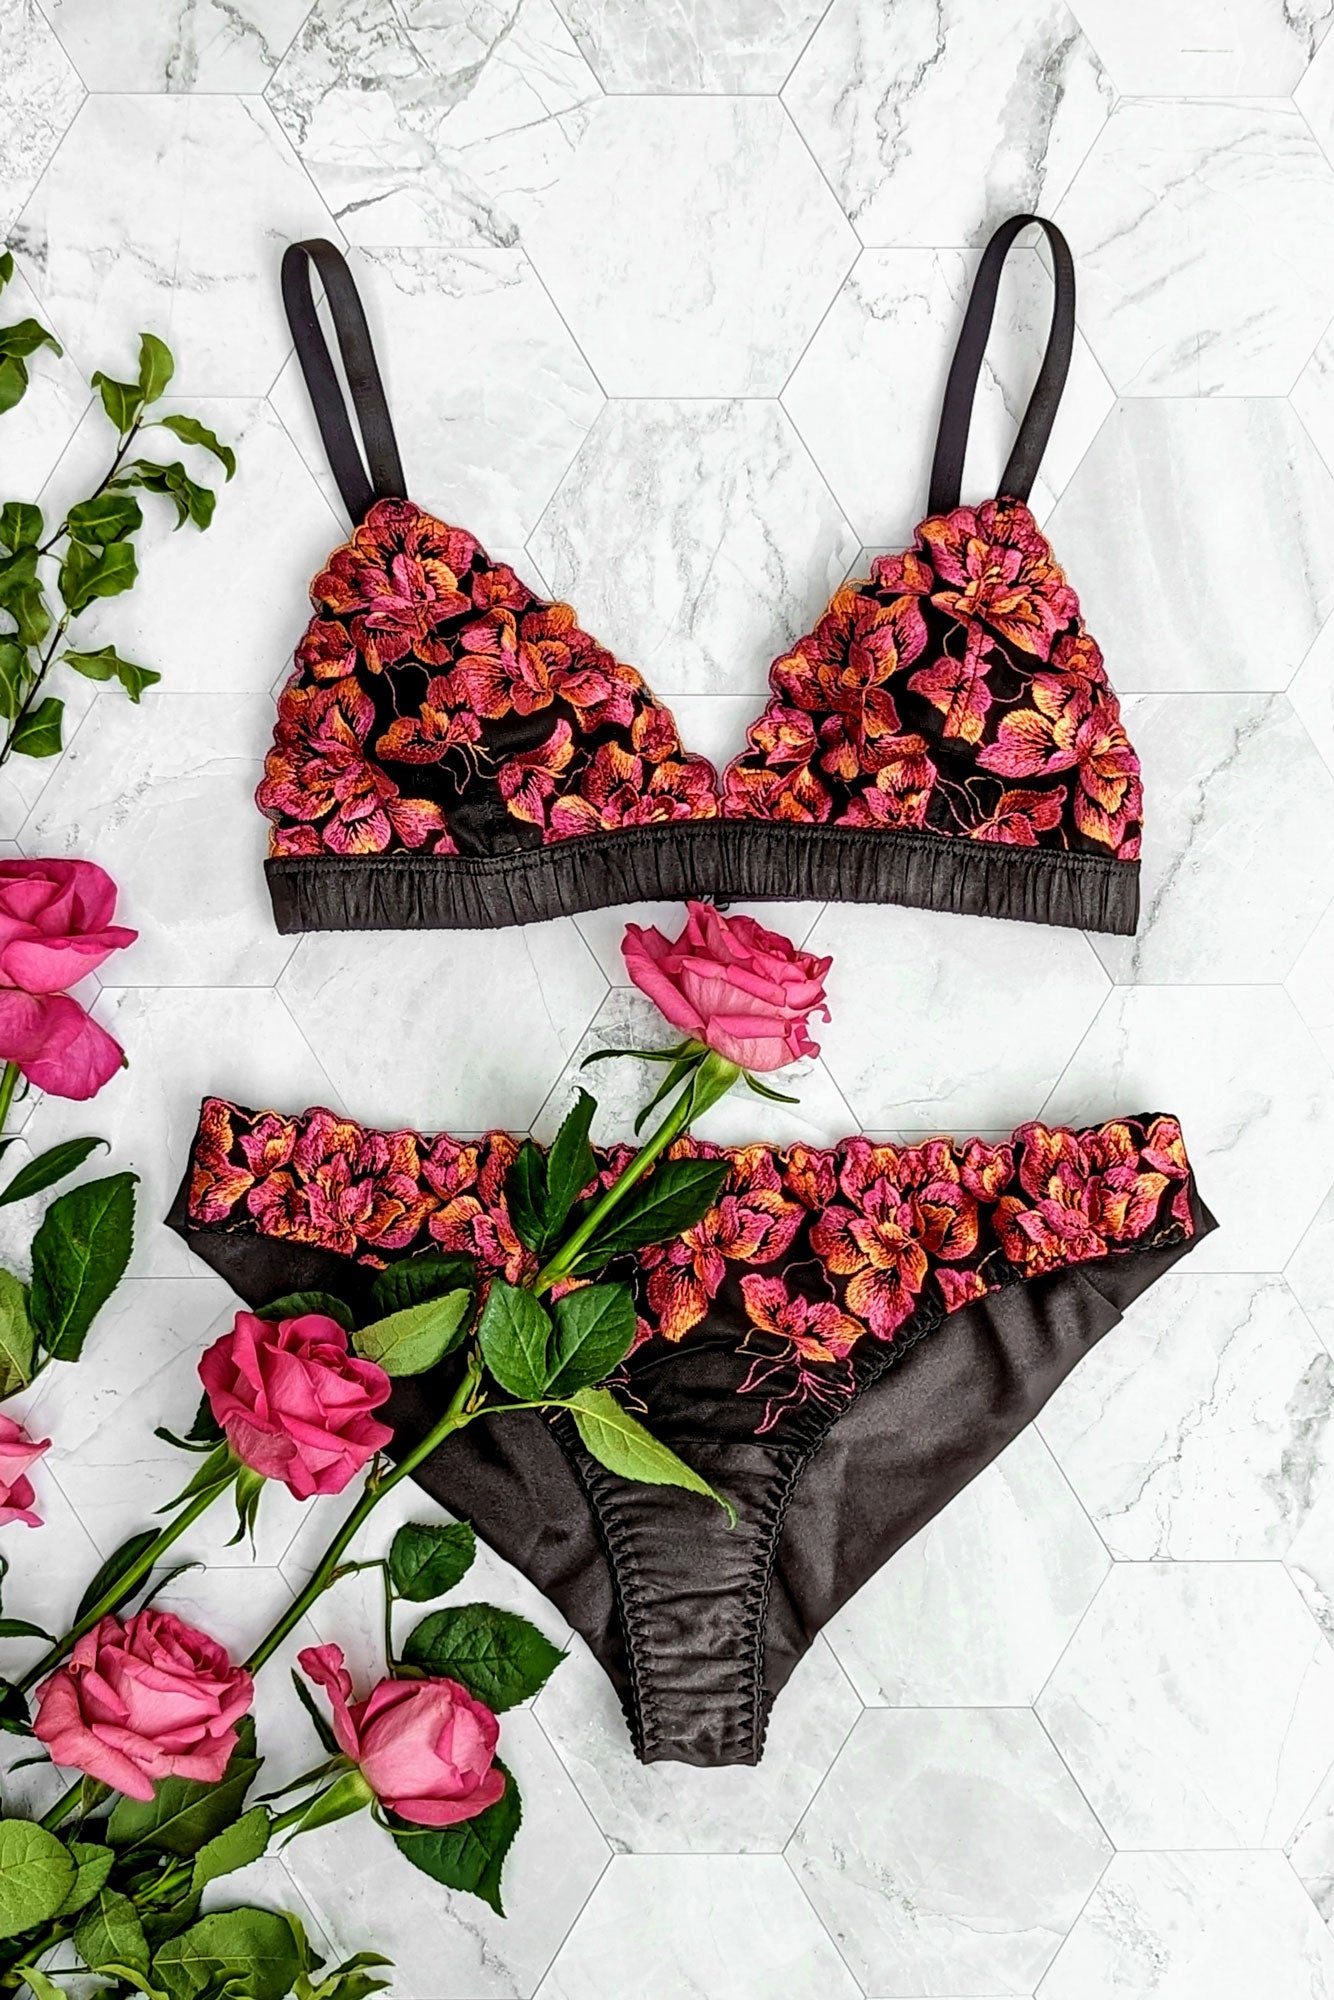 Luxury lingerie set with silk panties and floral pink bralette